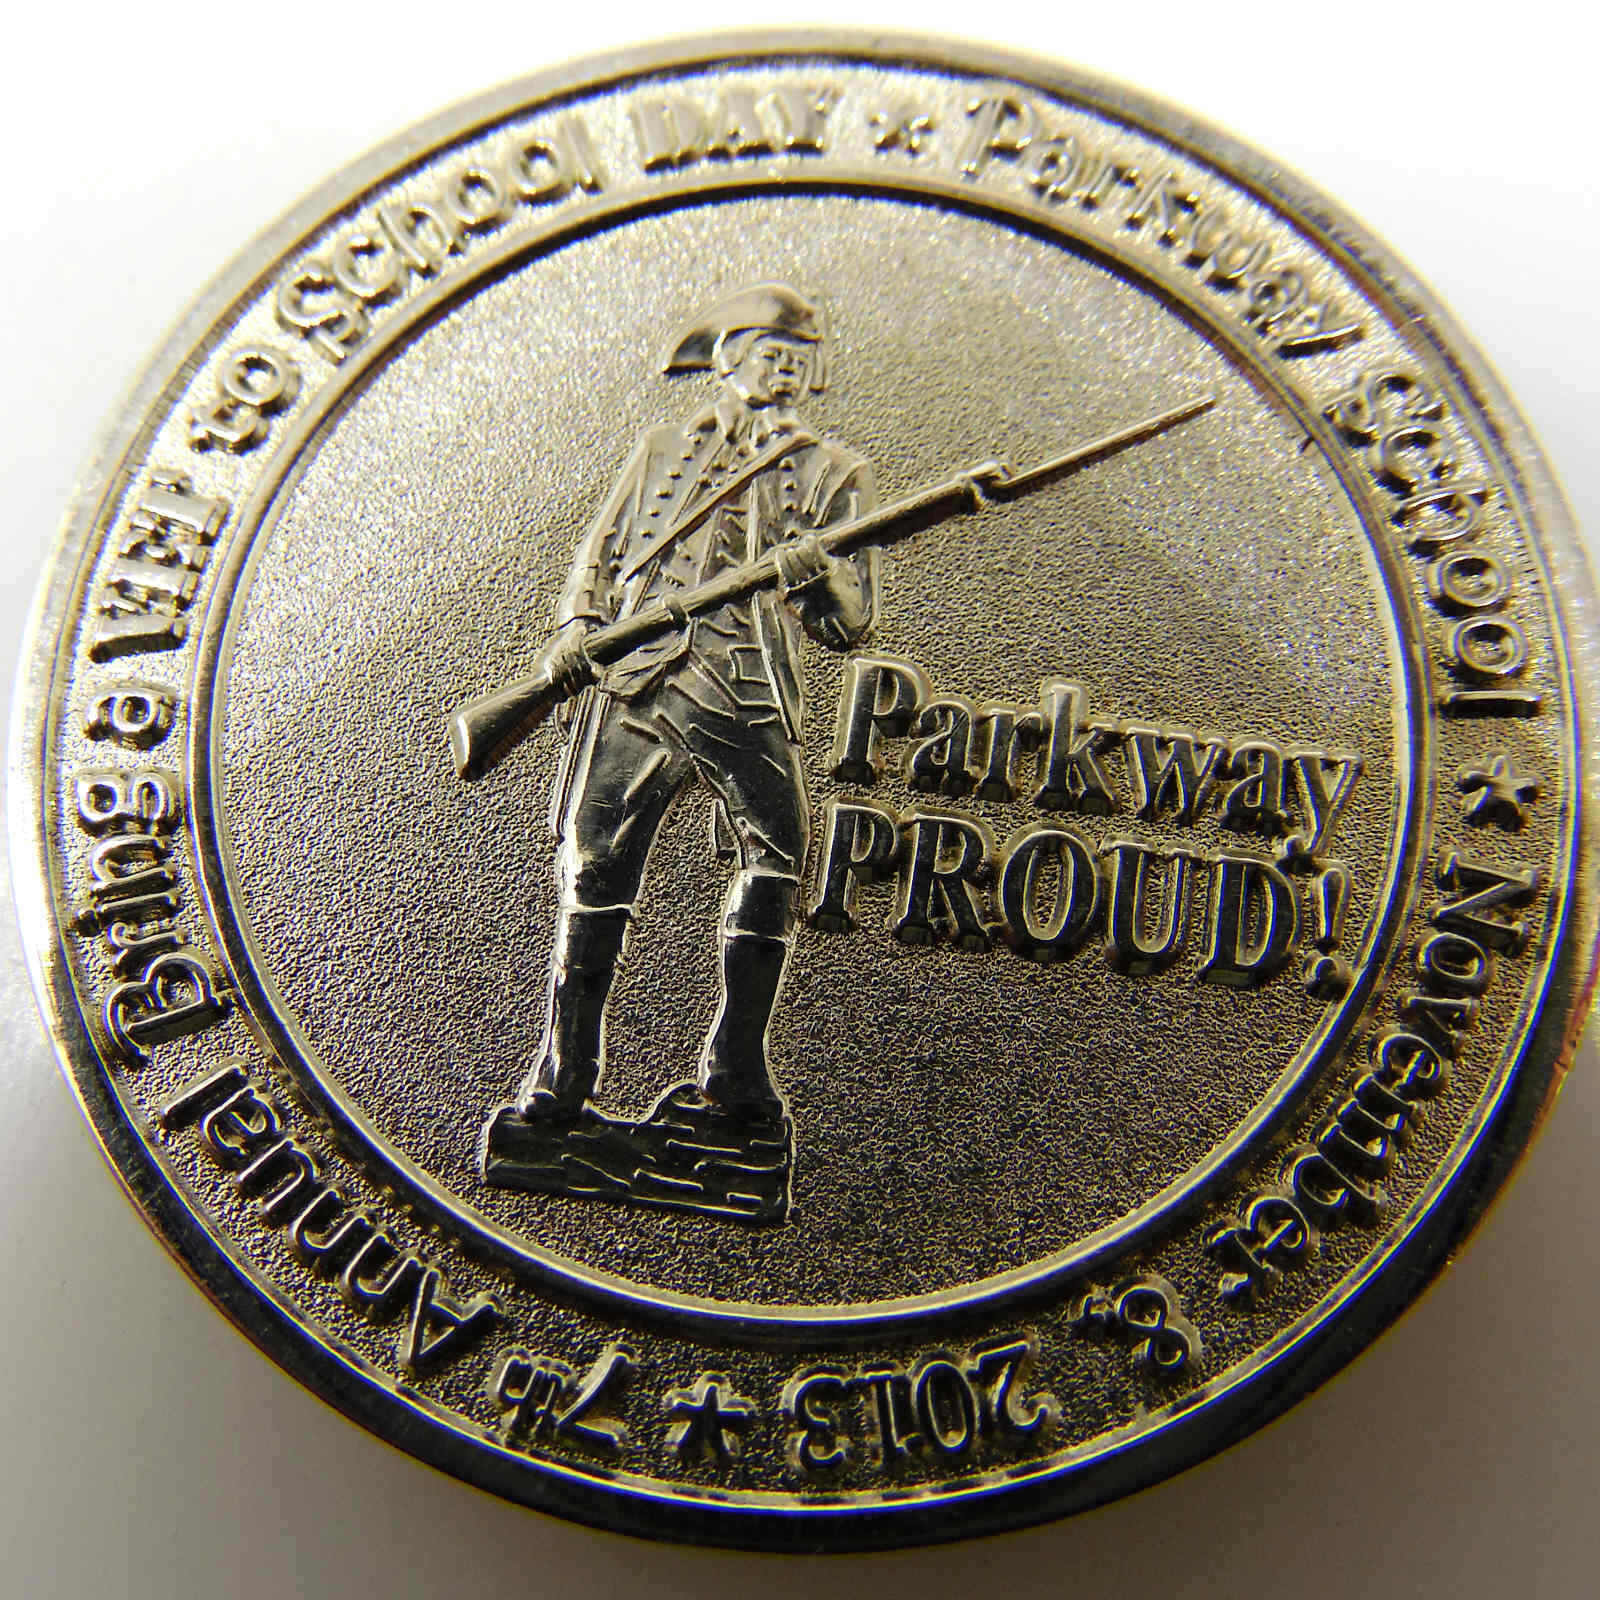 7TH ANNUAL BRING A VET TO SCHOOL DAY PARKWAY SCHOOL CHALLENGE COIN